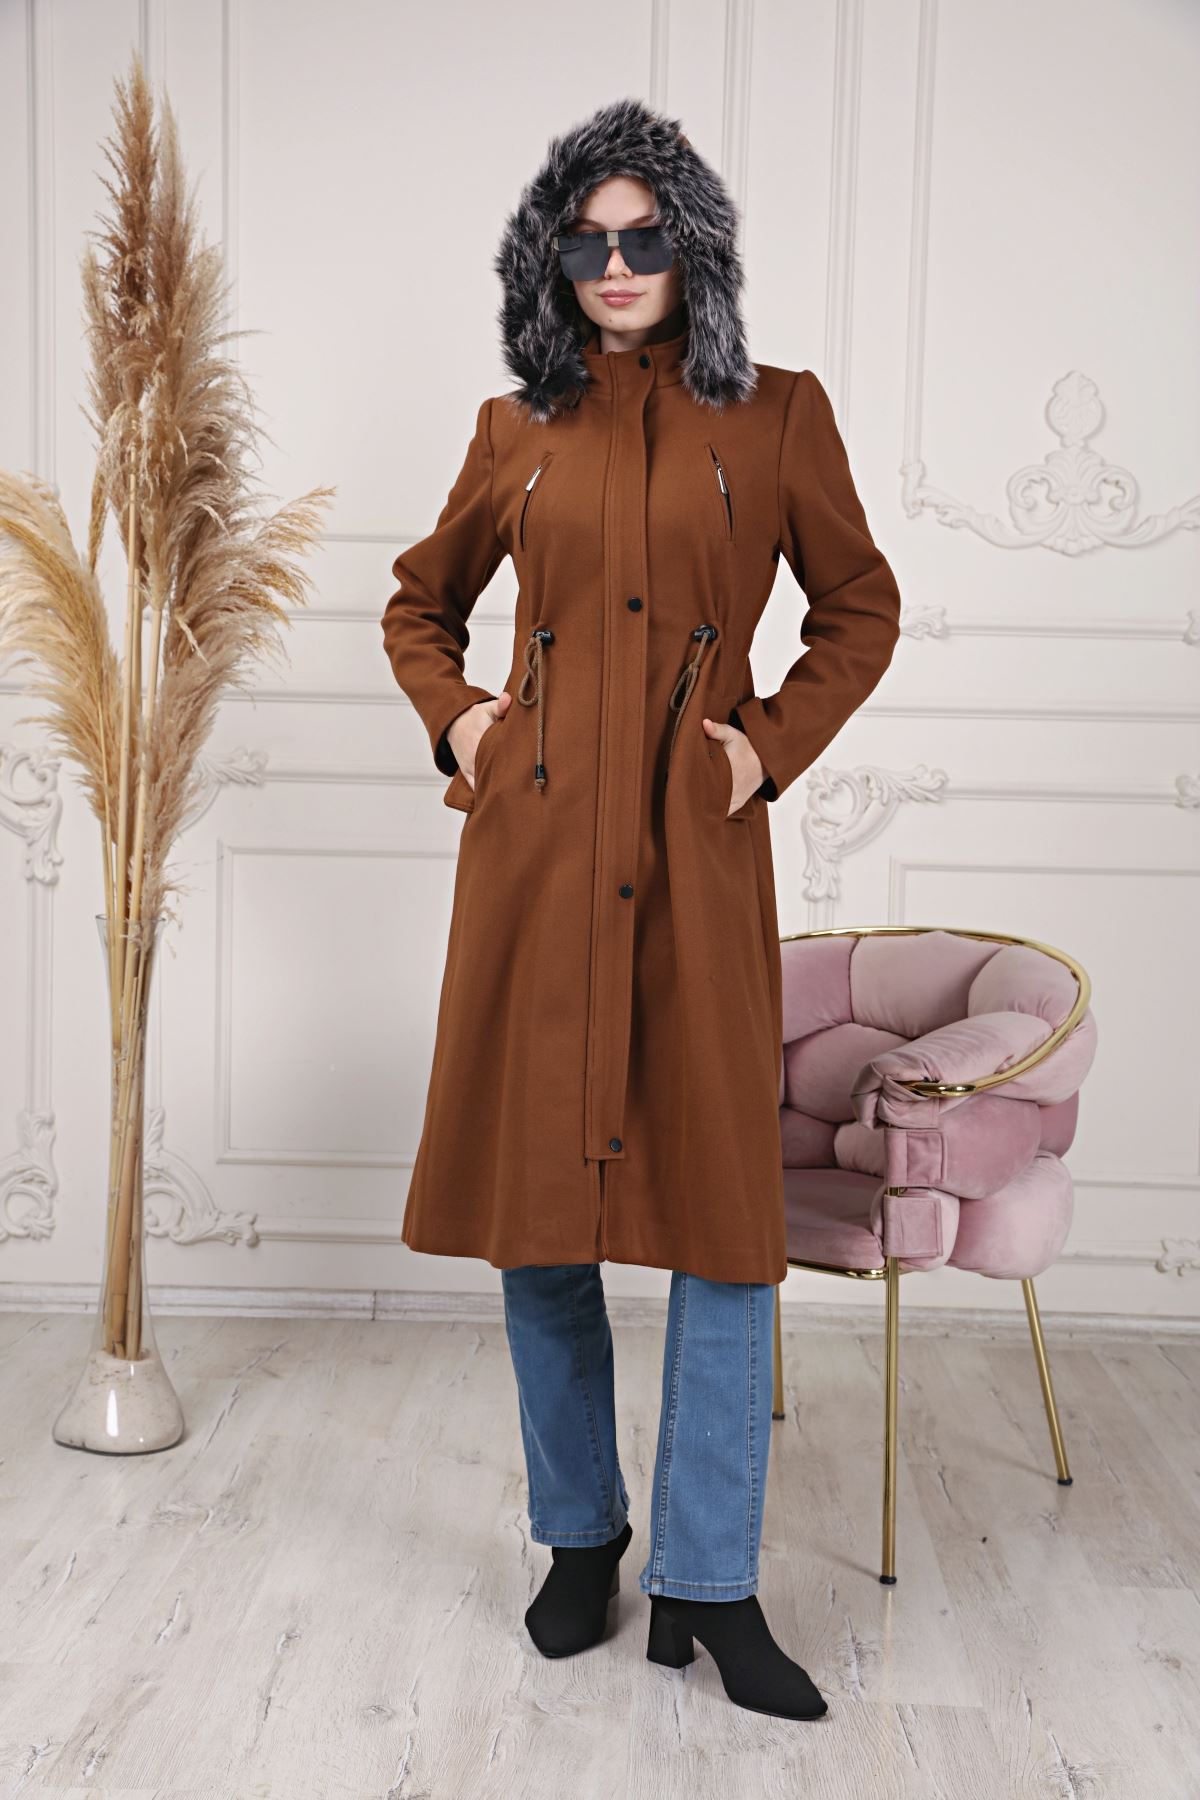 Hooded Long Women's Cashmere Coat with Drawstring Waist